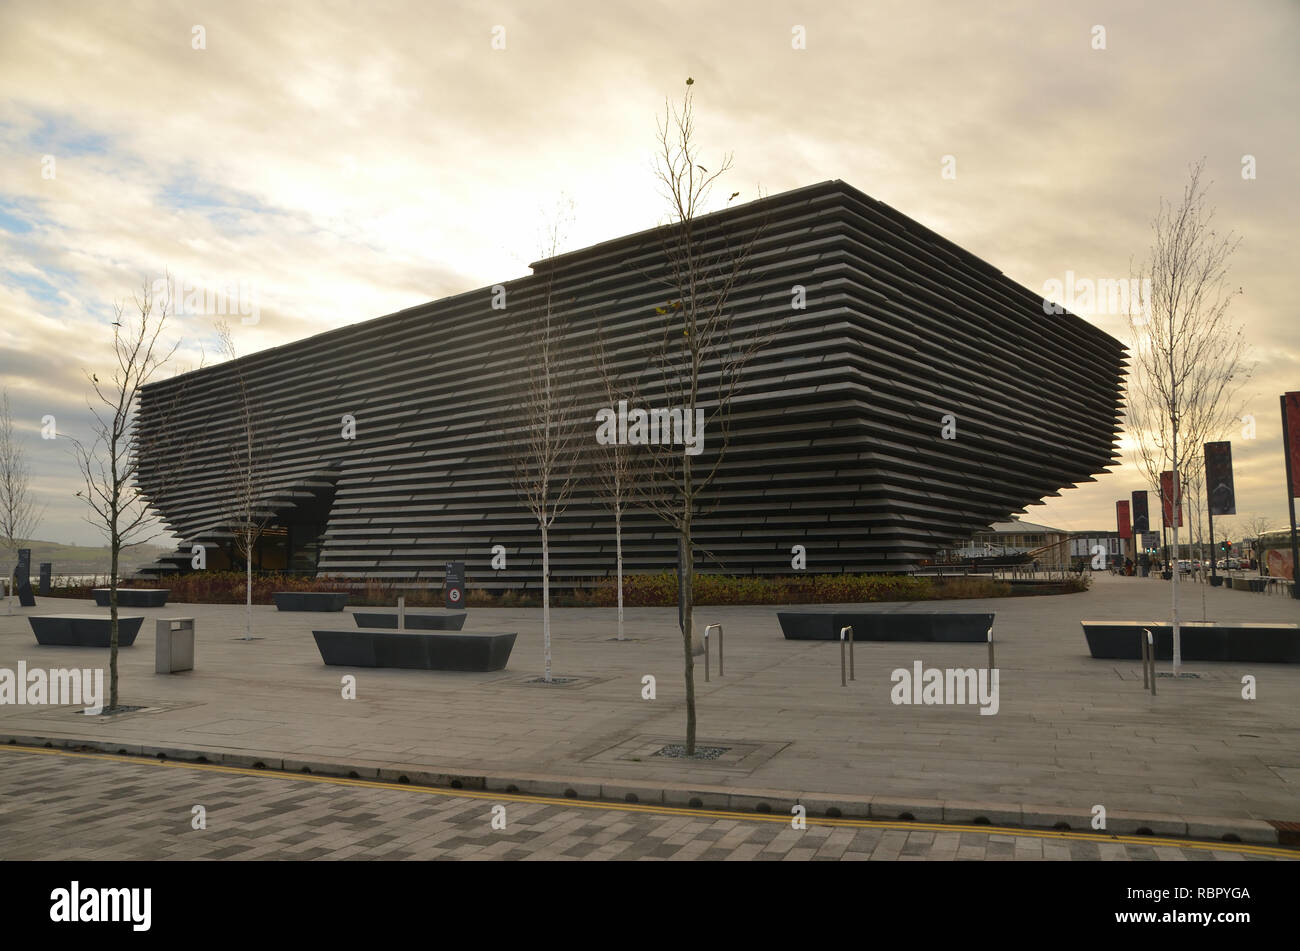 The V&A Museum building in Dundee, Scotland Stock Photo